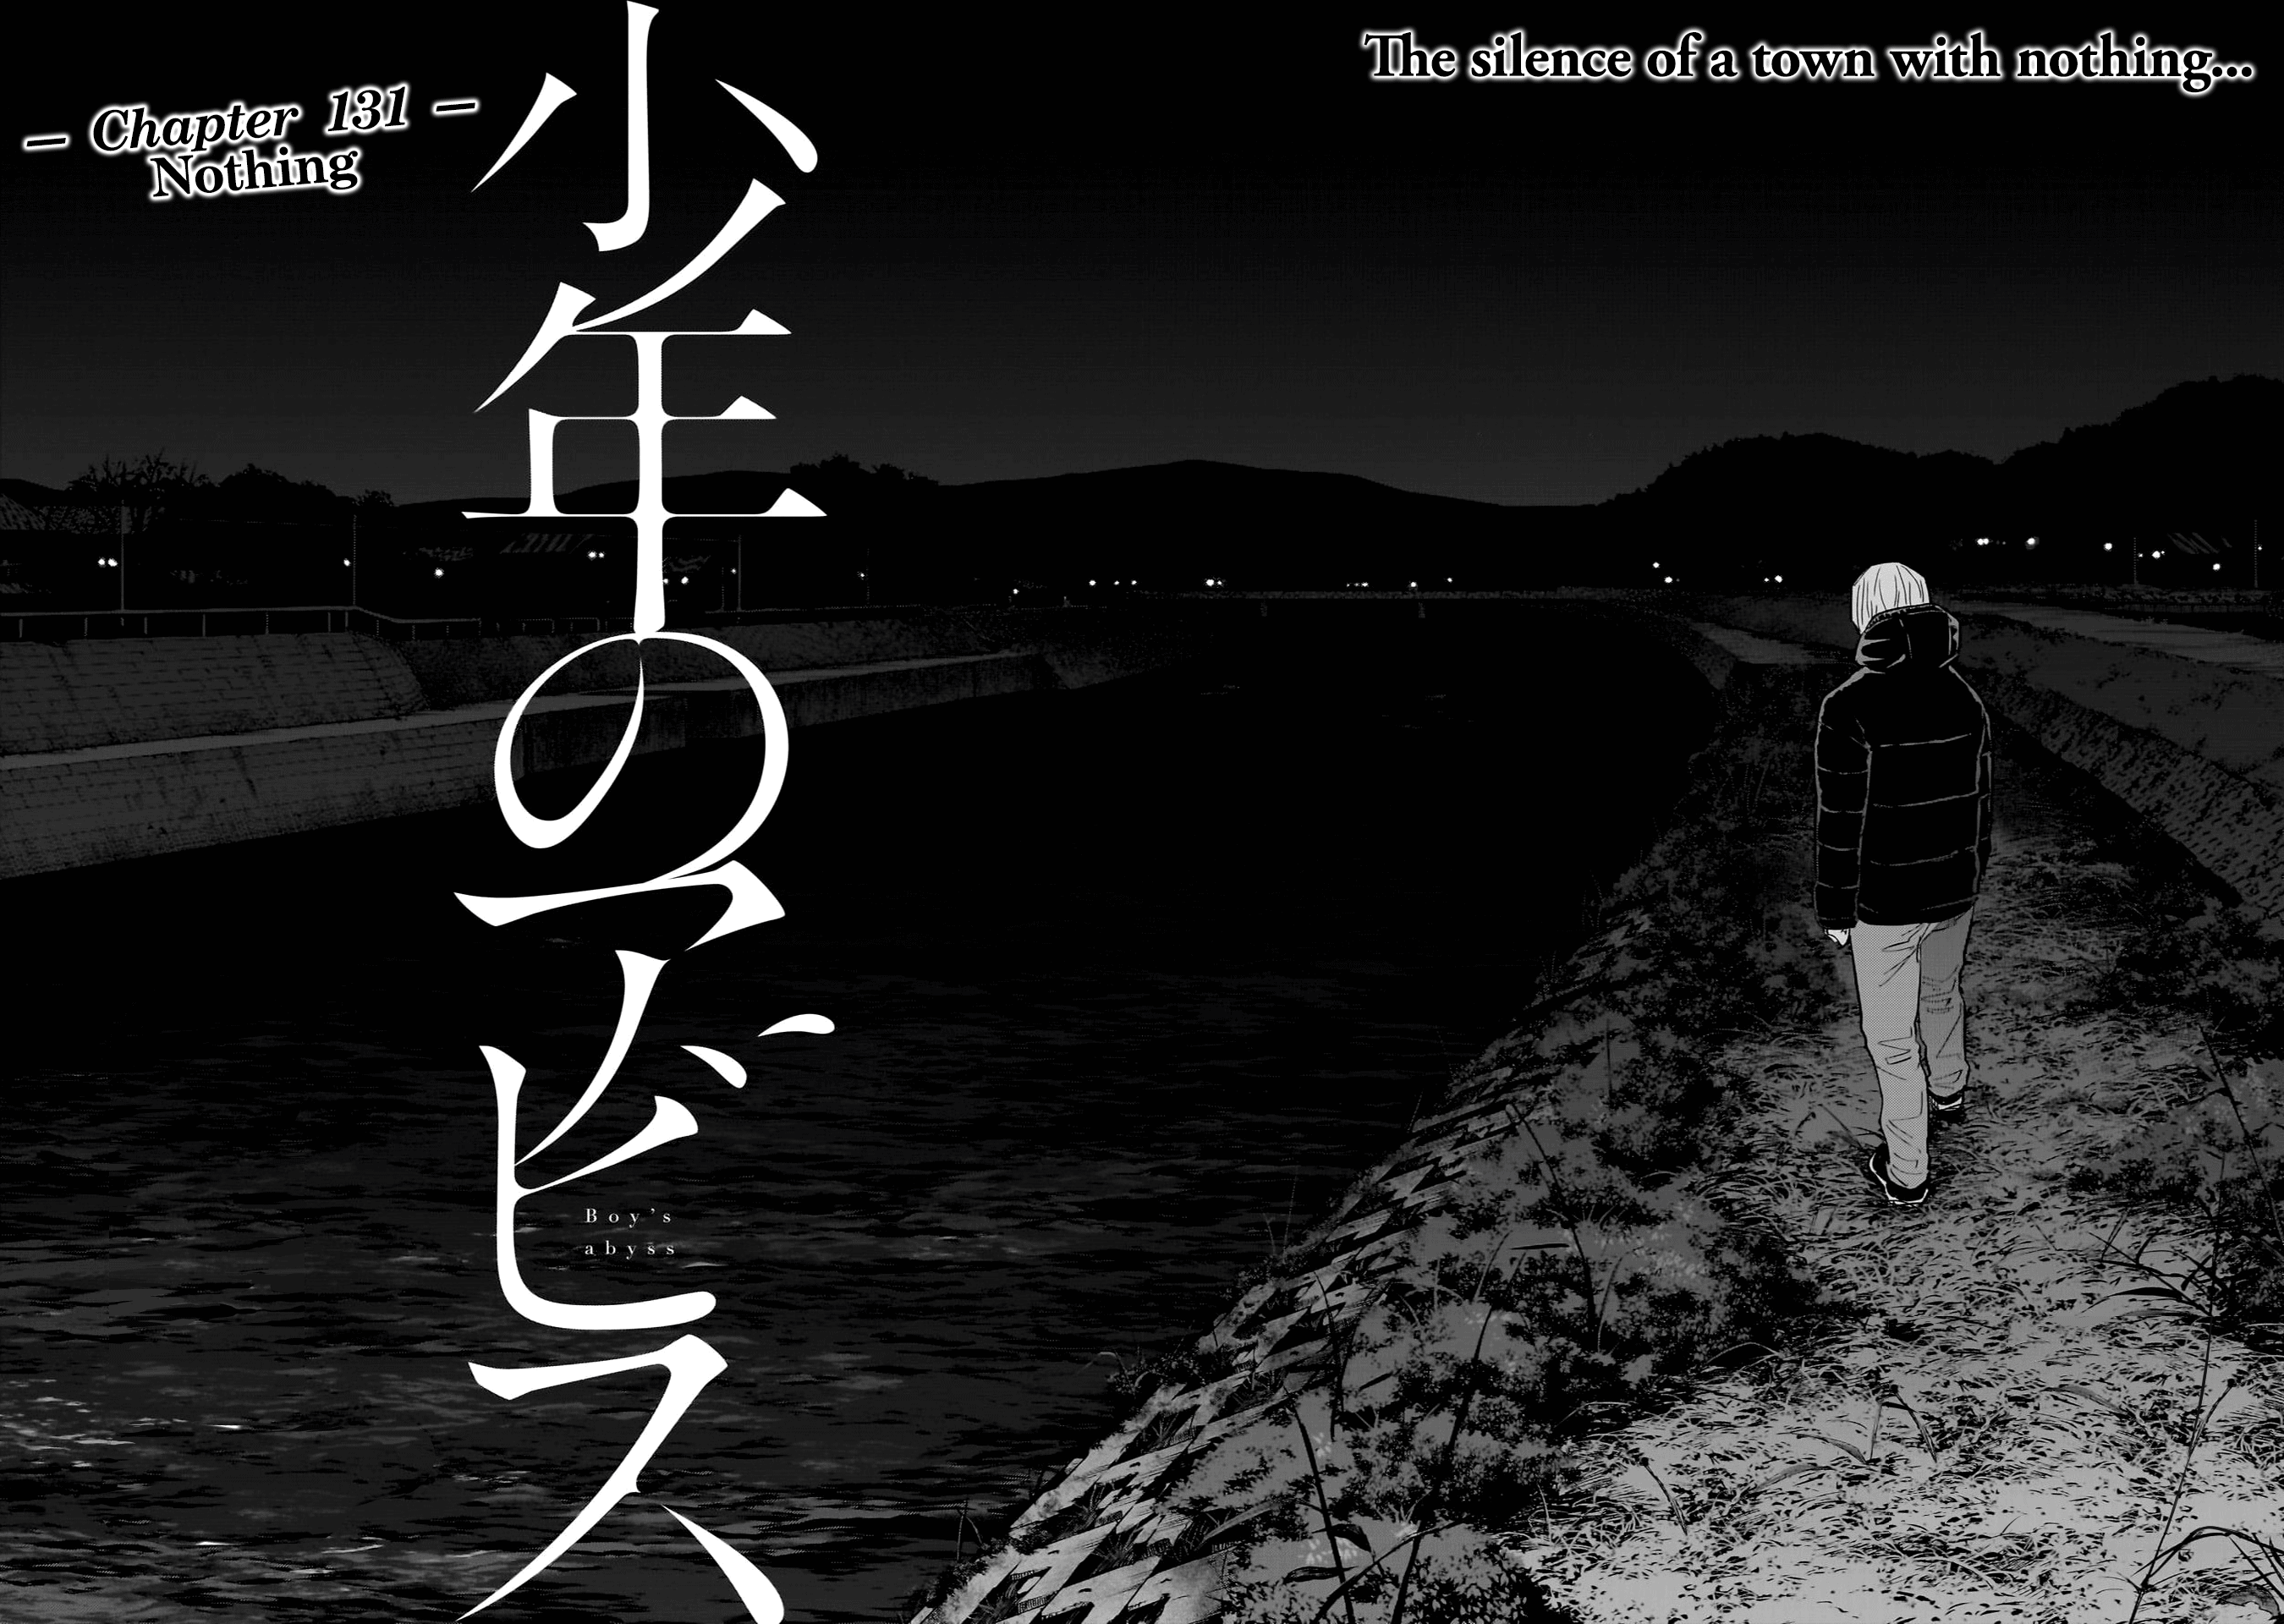 Boy's Abyss Chapter 131: Nothing - Picture 3